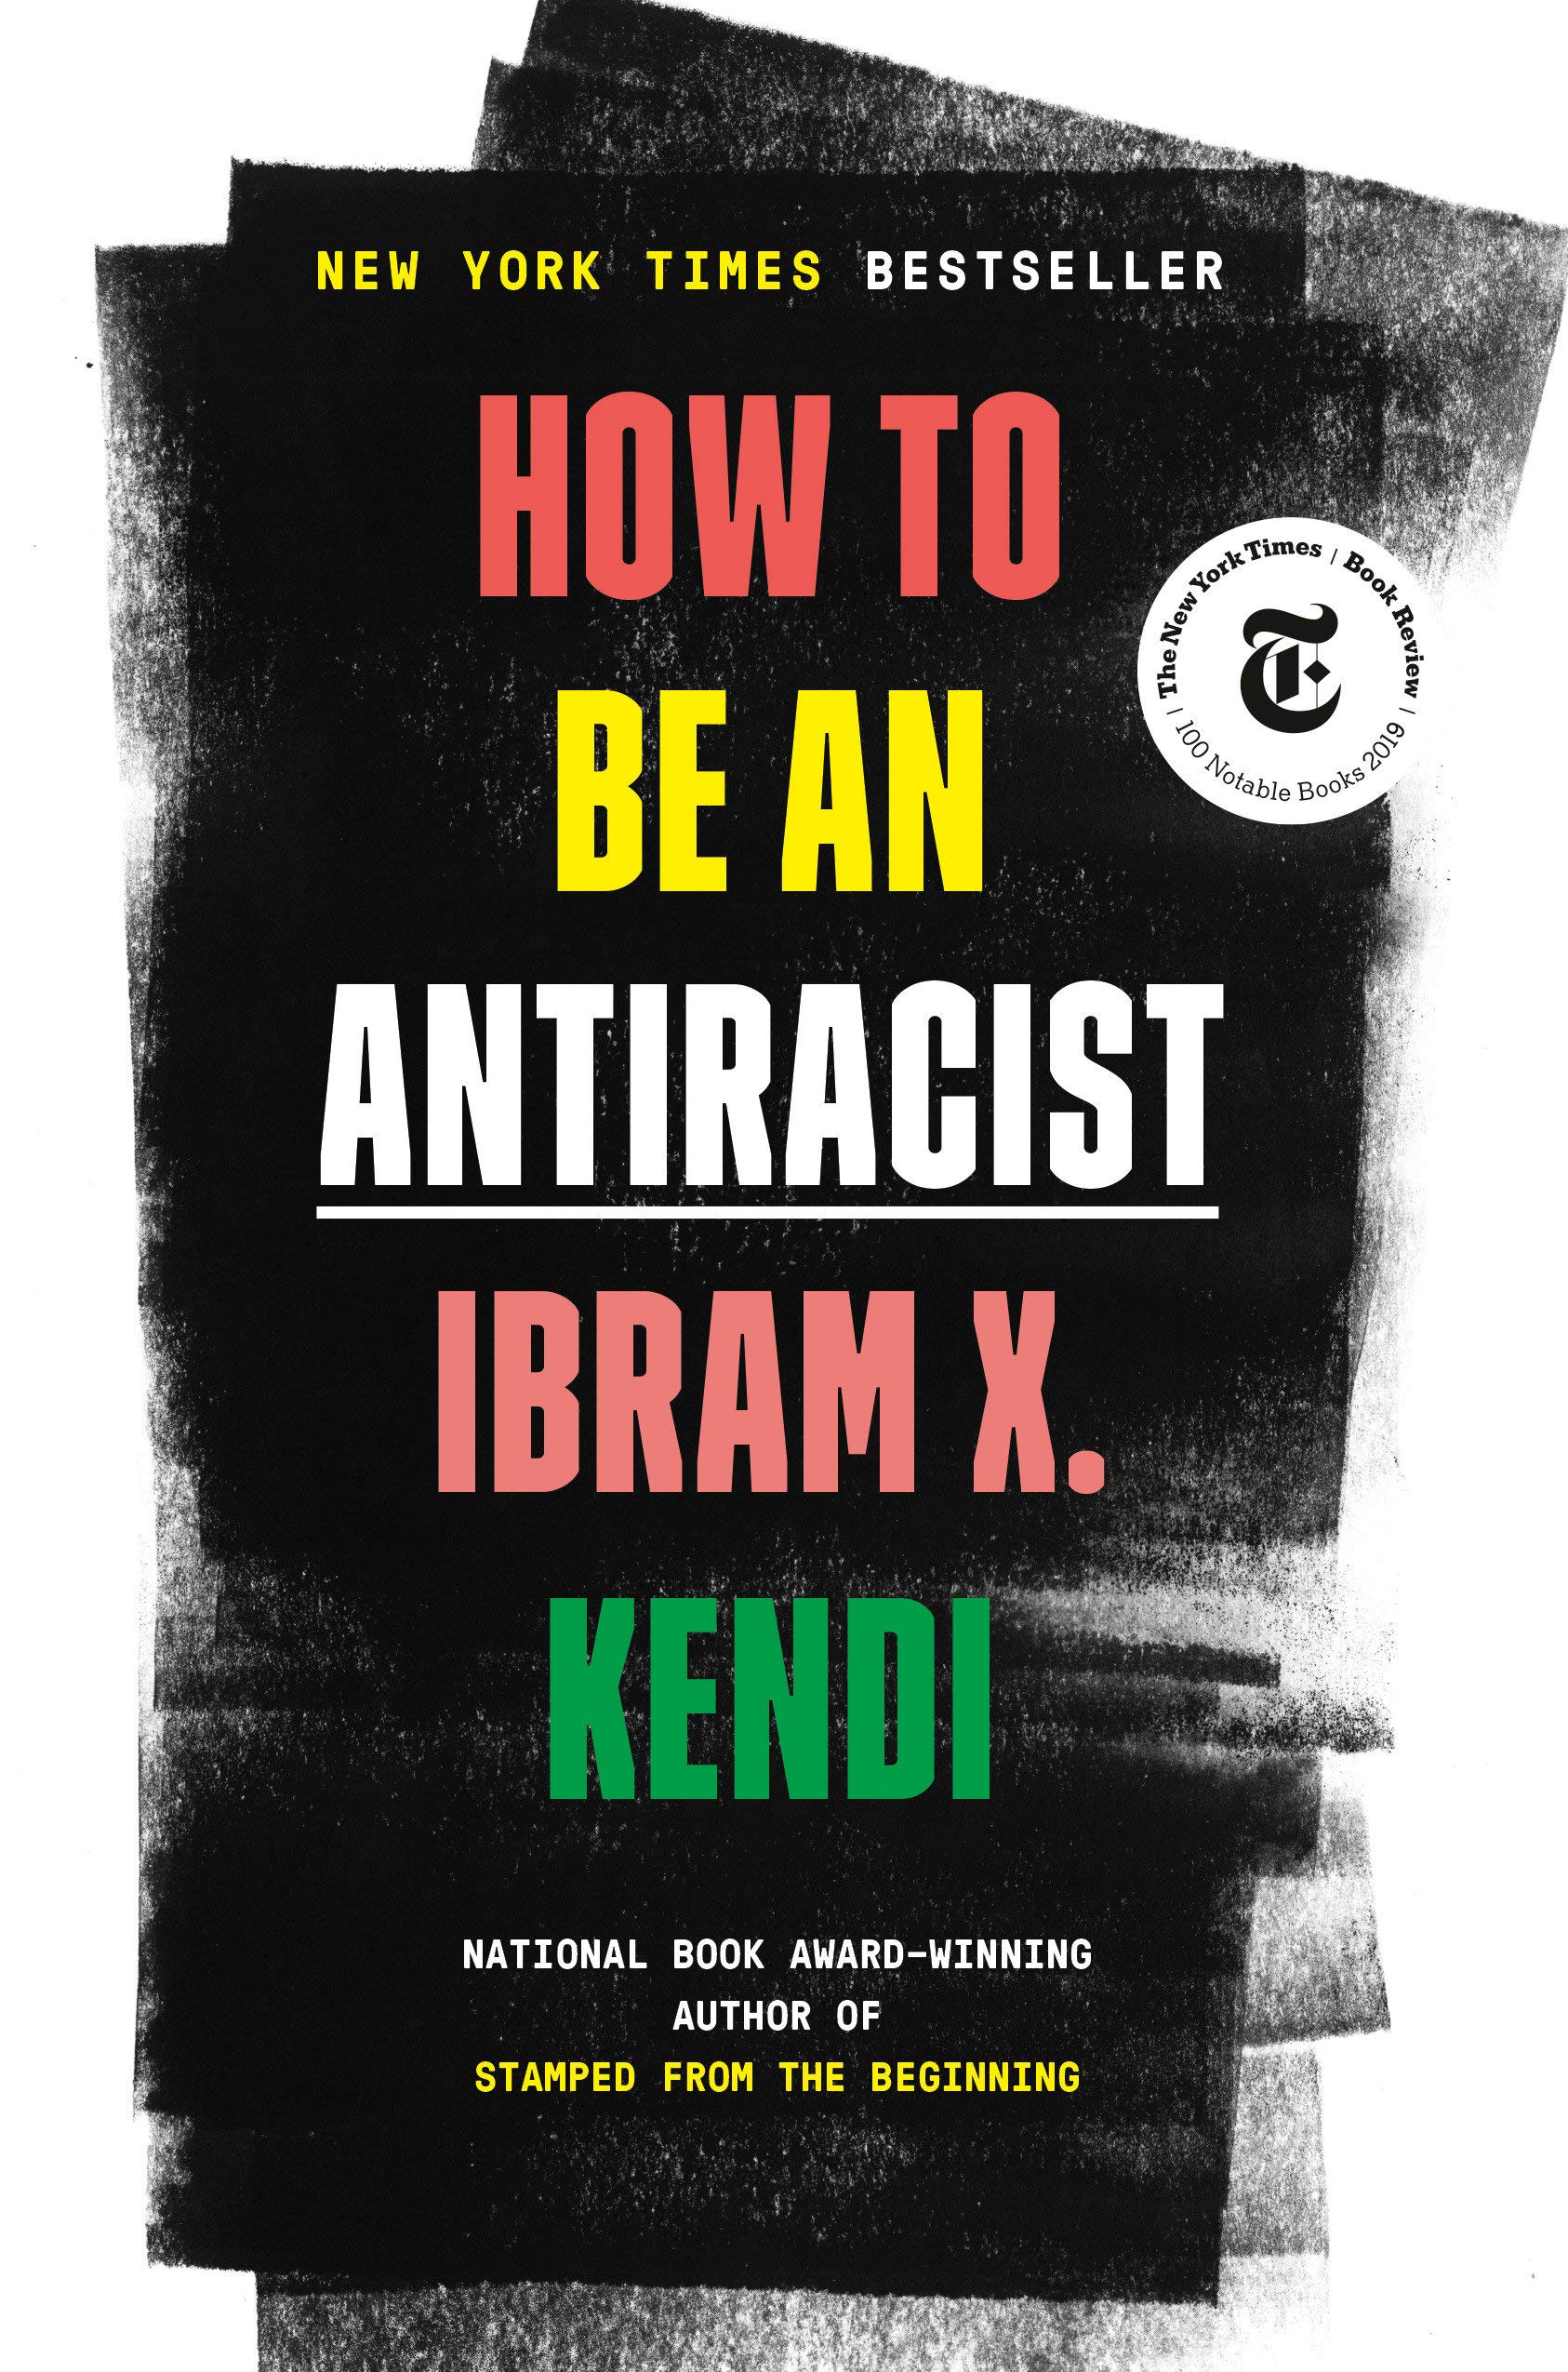 How to be an Antiracist Book Cover.